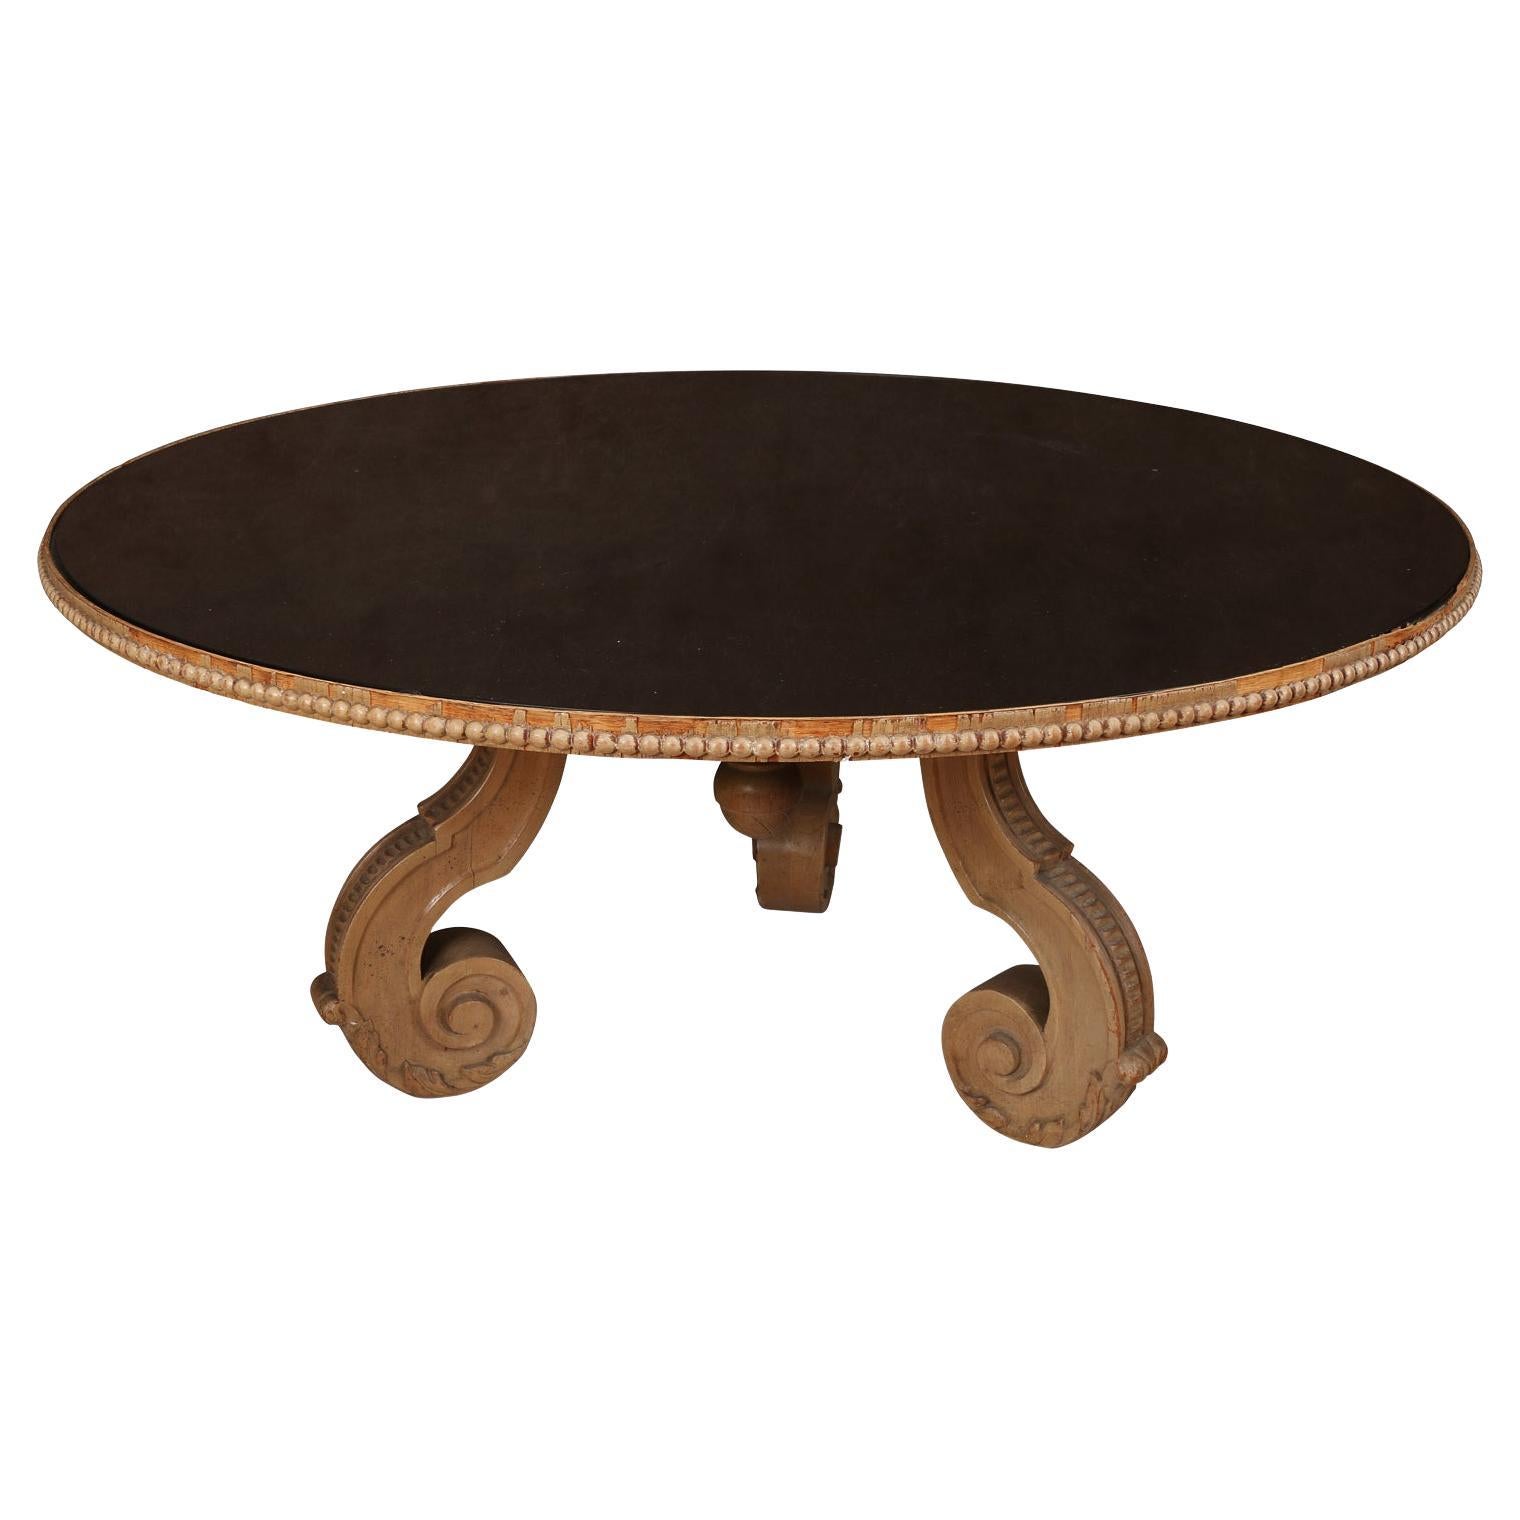 Serge Roche Style Round Cerused Oak Coffee Table With Black Mirrored Top